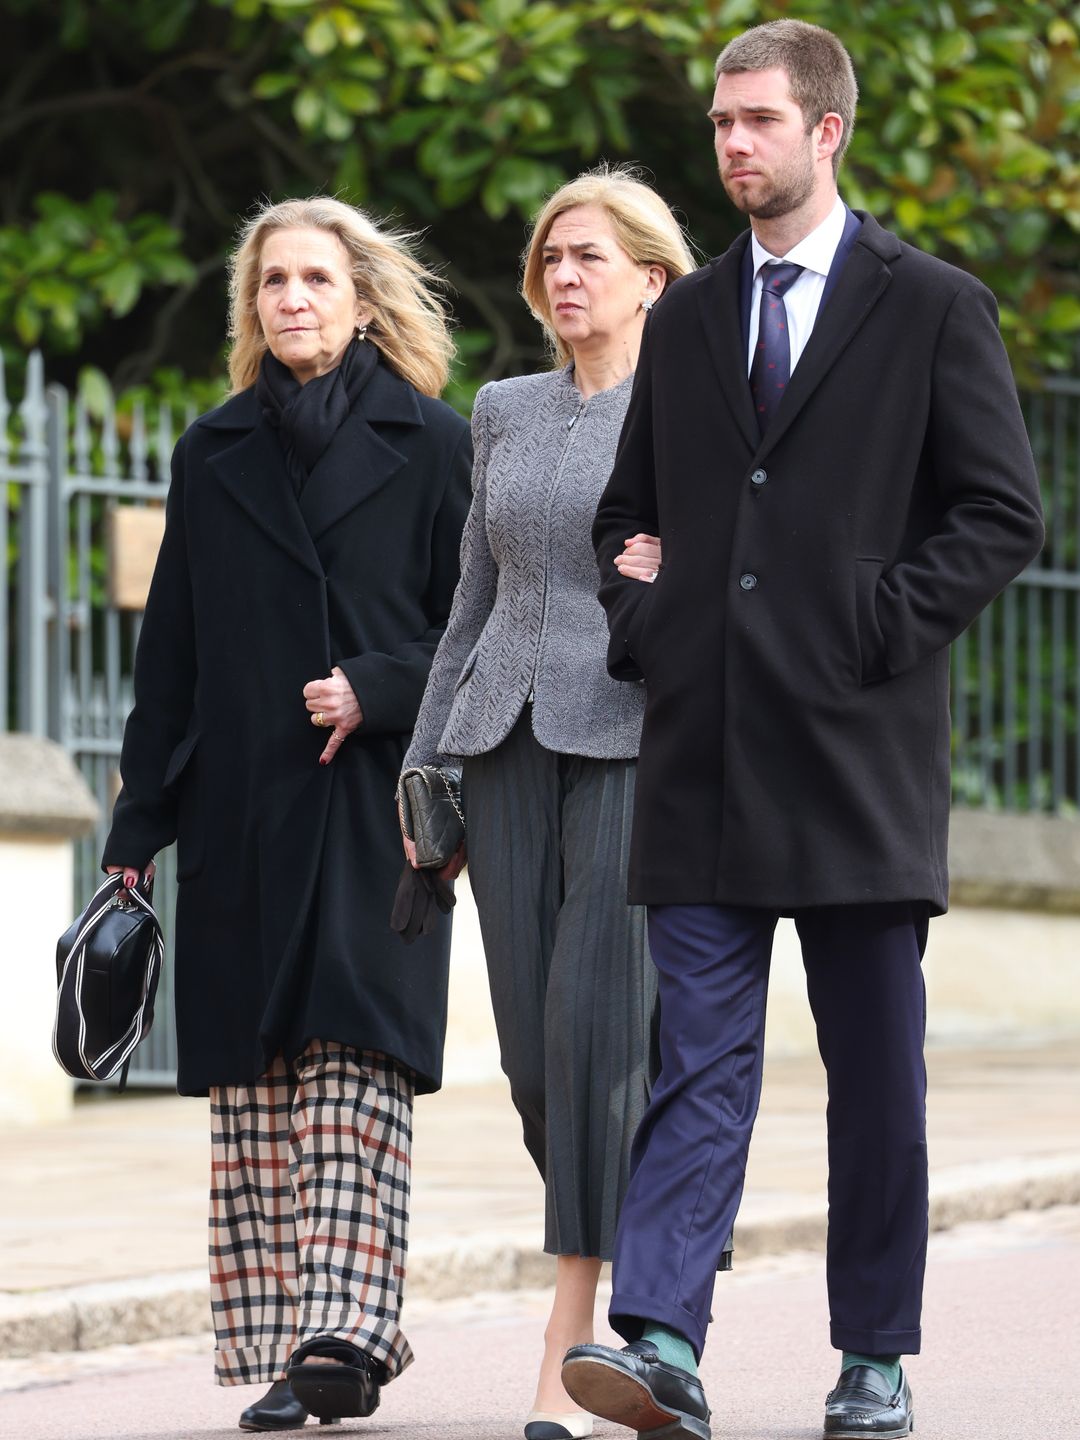 Infanta Elena, Duchess of Lugo, Infanta Cristina of Spain and Juan Valentin Urdangarin attend the Thanksgiving Service for King Constantine of the Hellenes